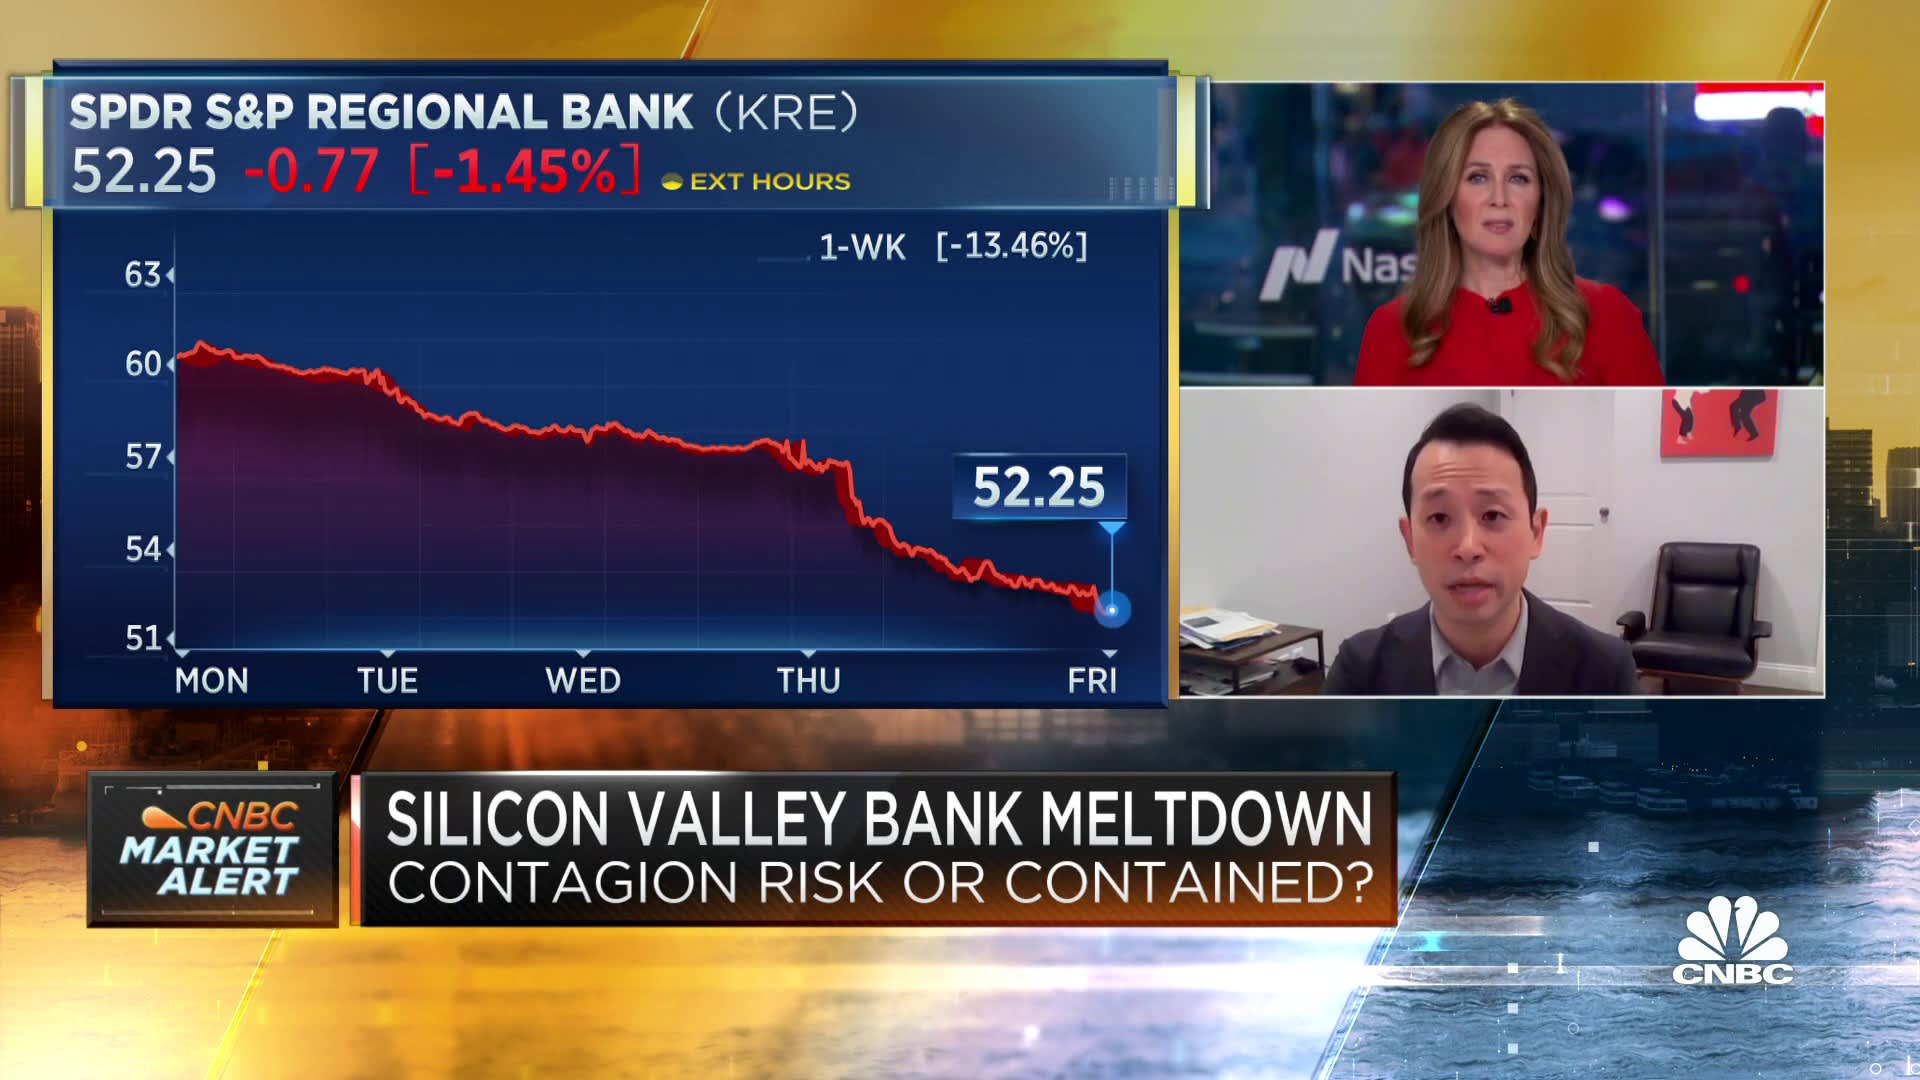 Silicon Valley Bank meltdown: Contagion risk or contained?